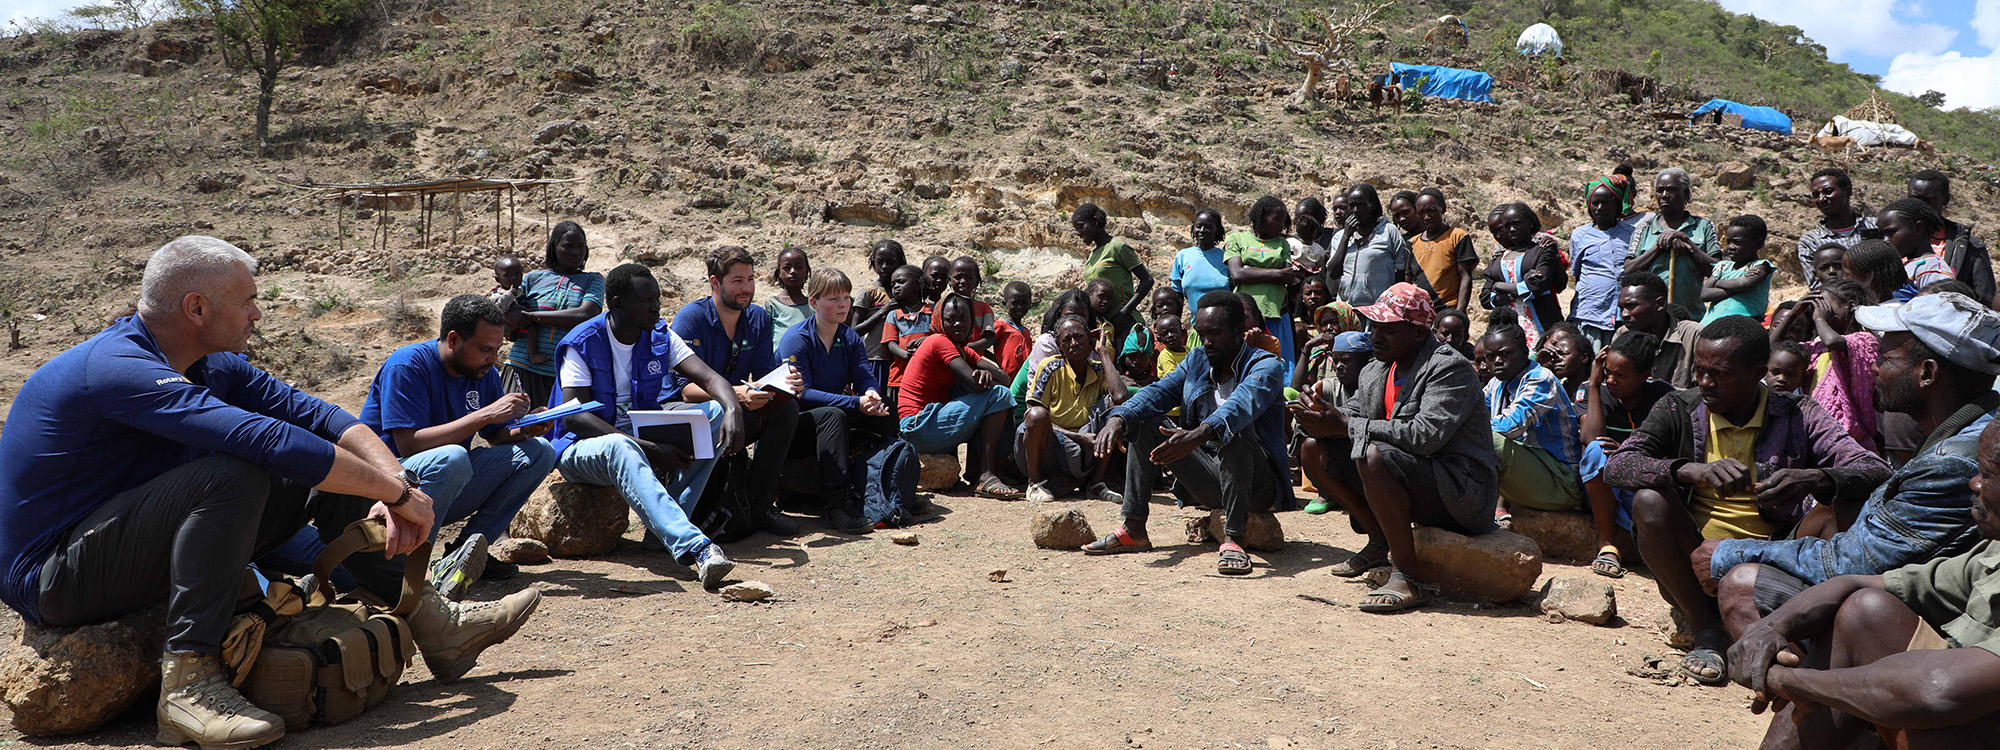 ShelterBox staff and response team members meet people in Ethiopia